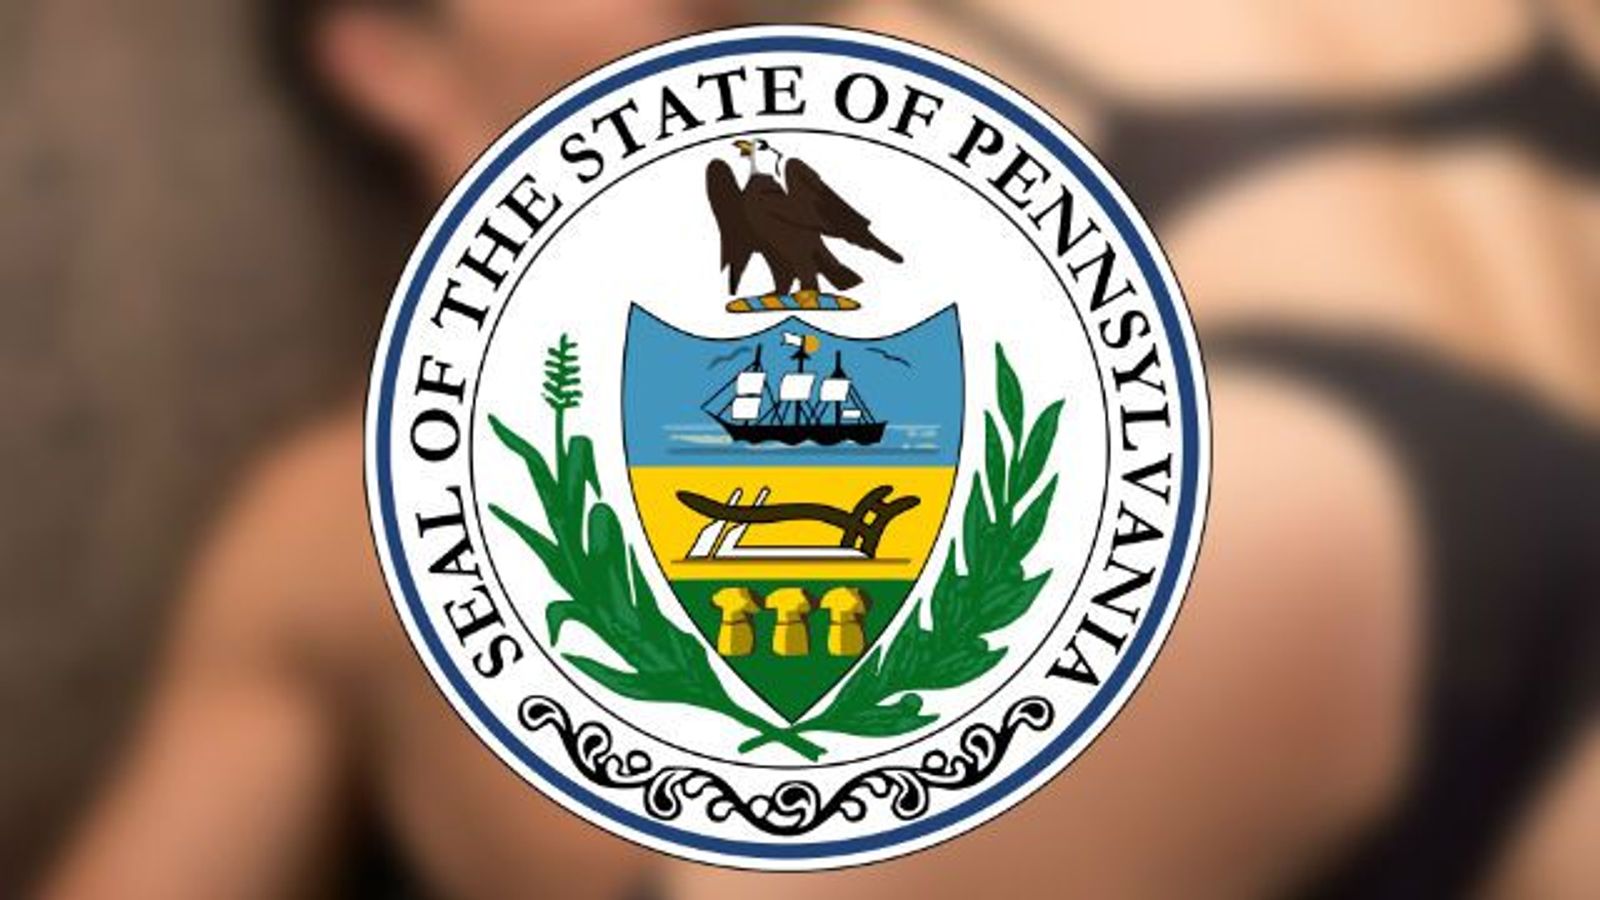 Porn Email Firings Continue in Scandal-Plagued Pennsylvania